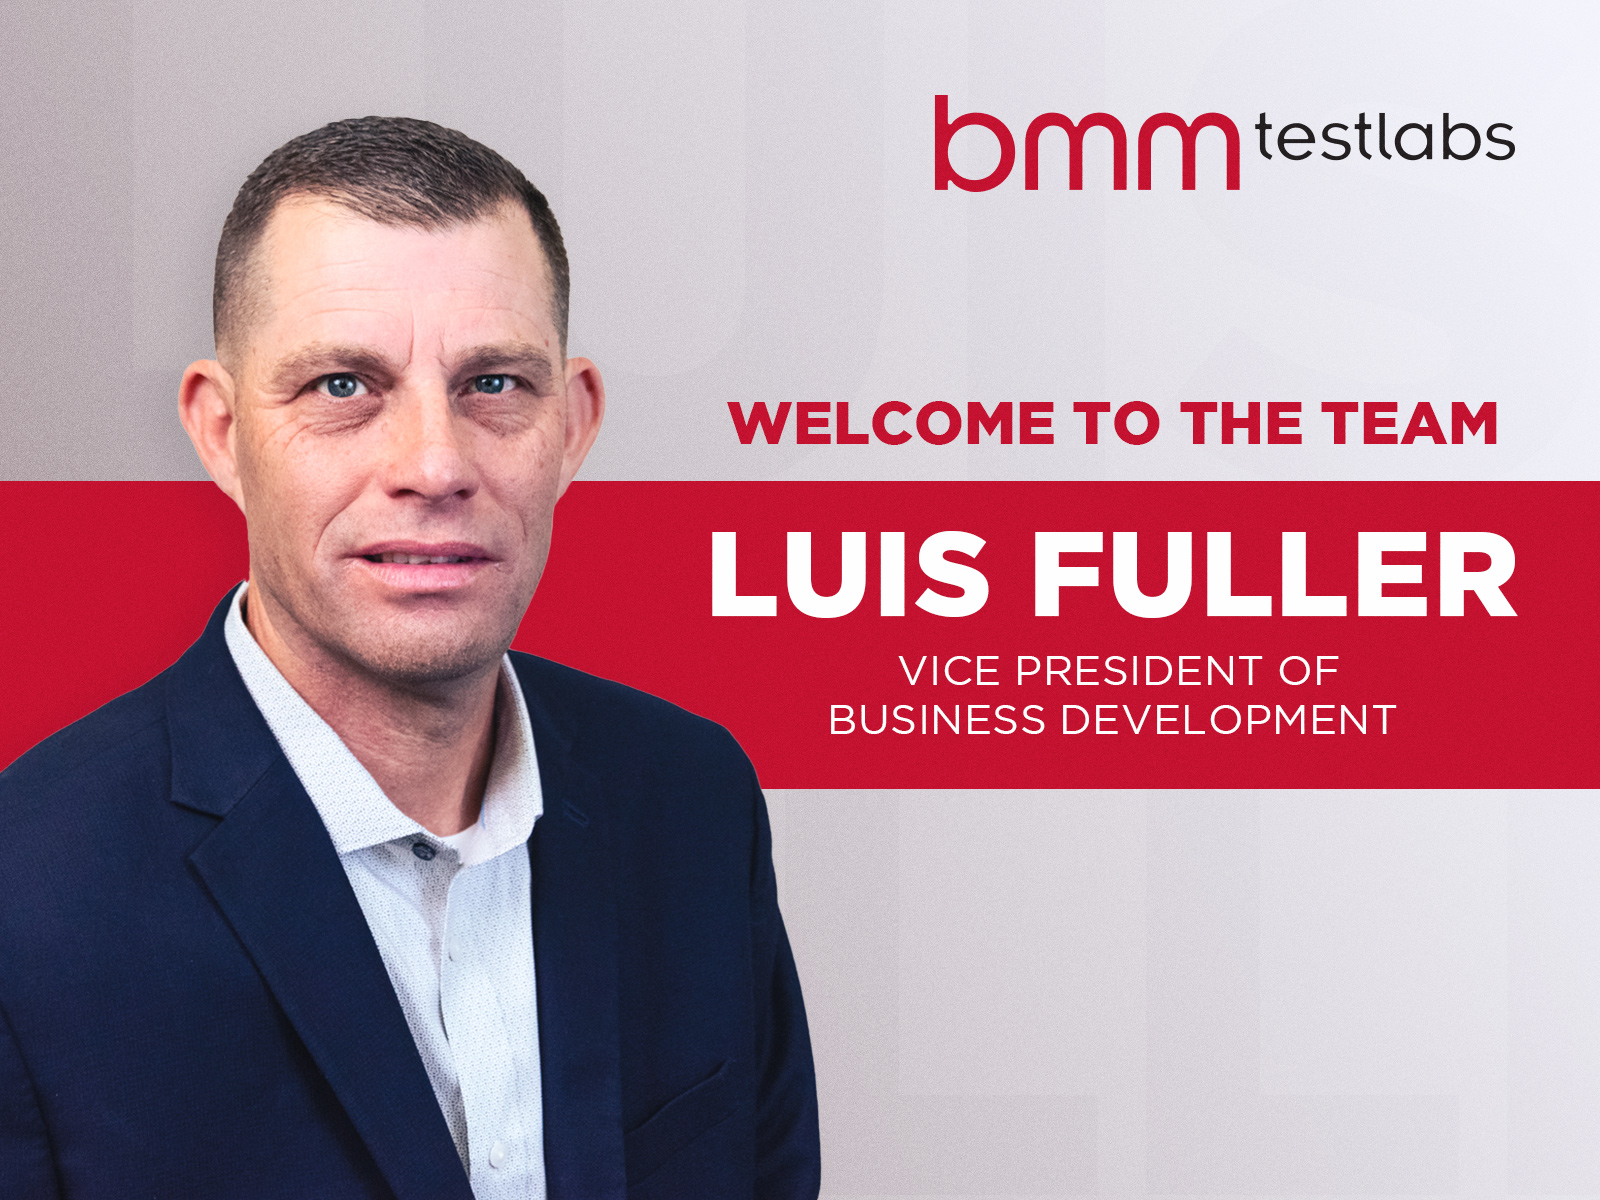 BMM Testlabs Welcomes Luis Fuller As Vice President Of Business Development